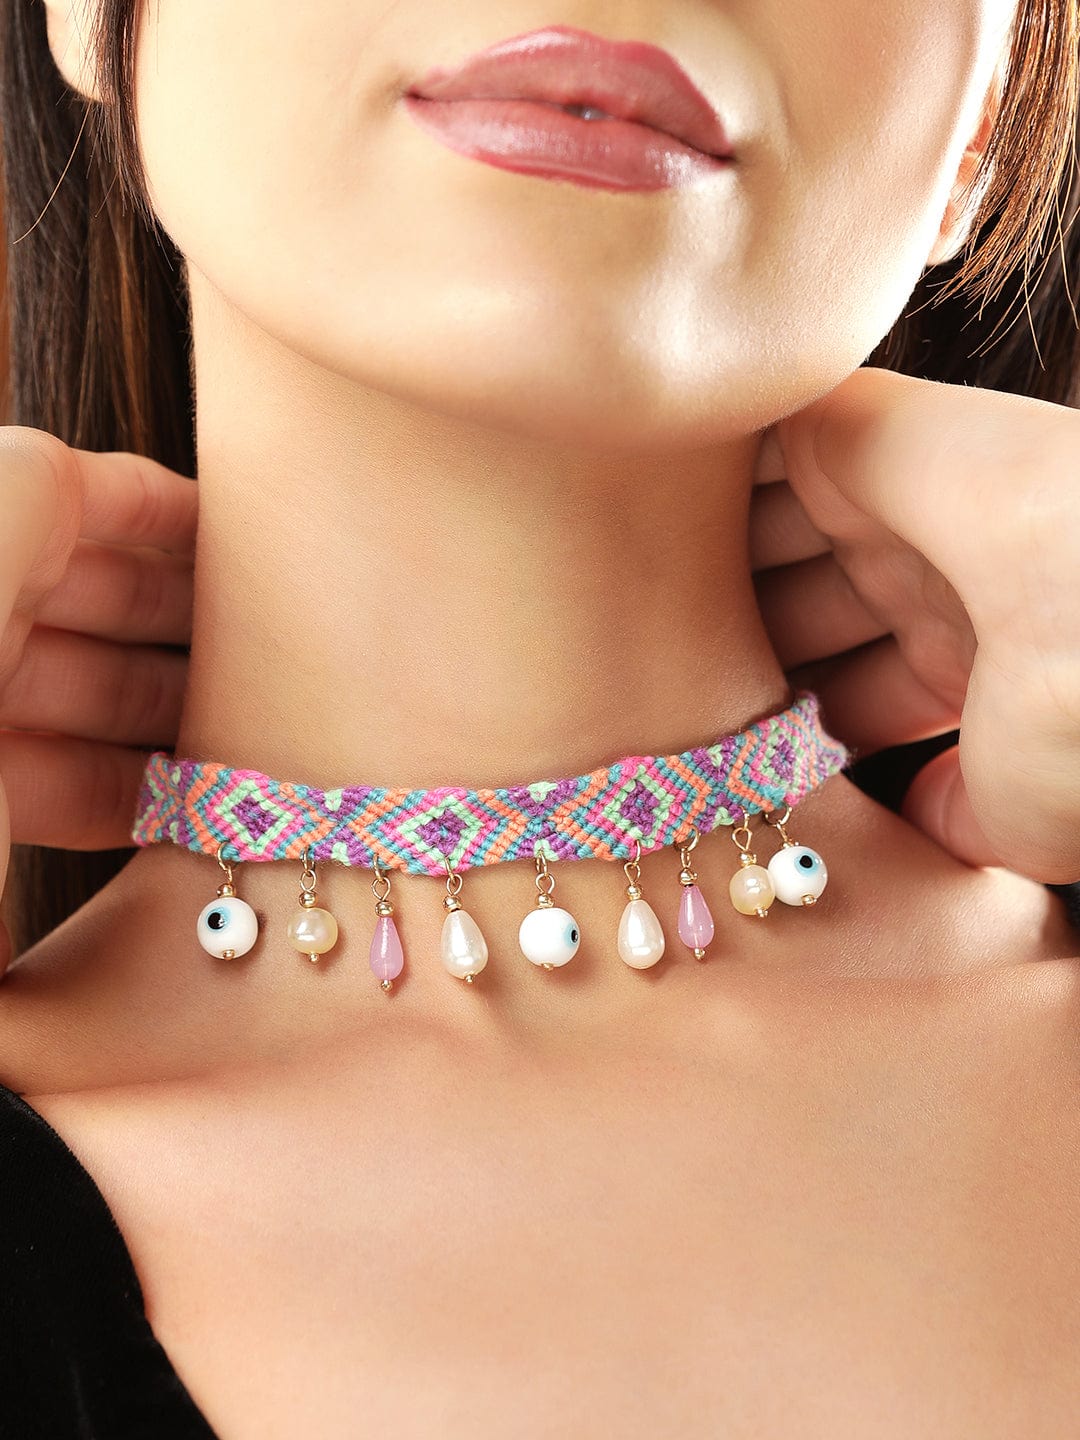 Rubans Voguish Pink Blue Necklace With Hanging Beads And Pearls Chain &amp; Necklaces